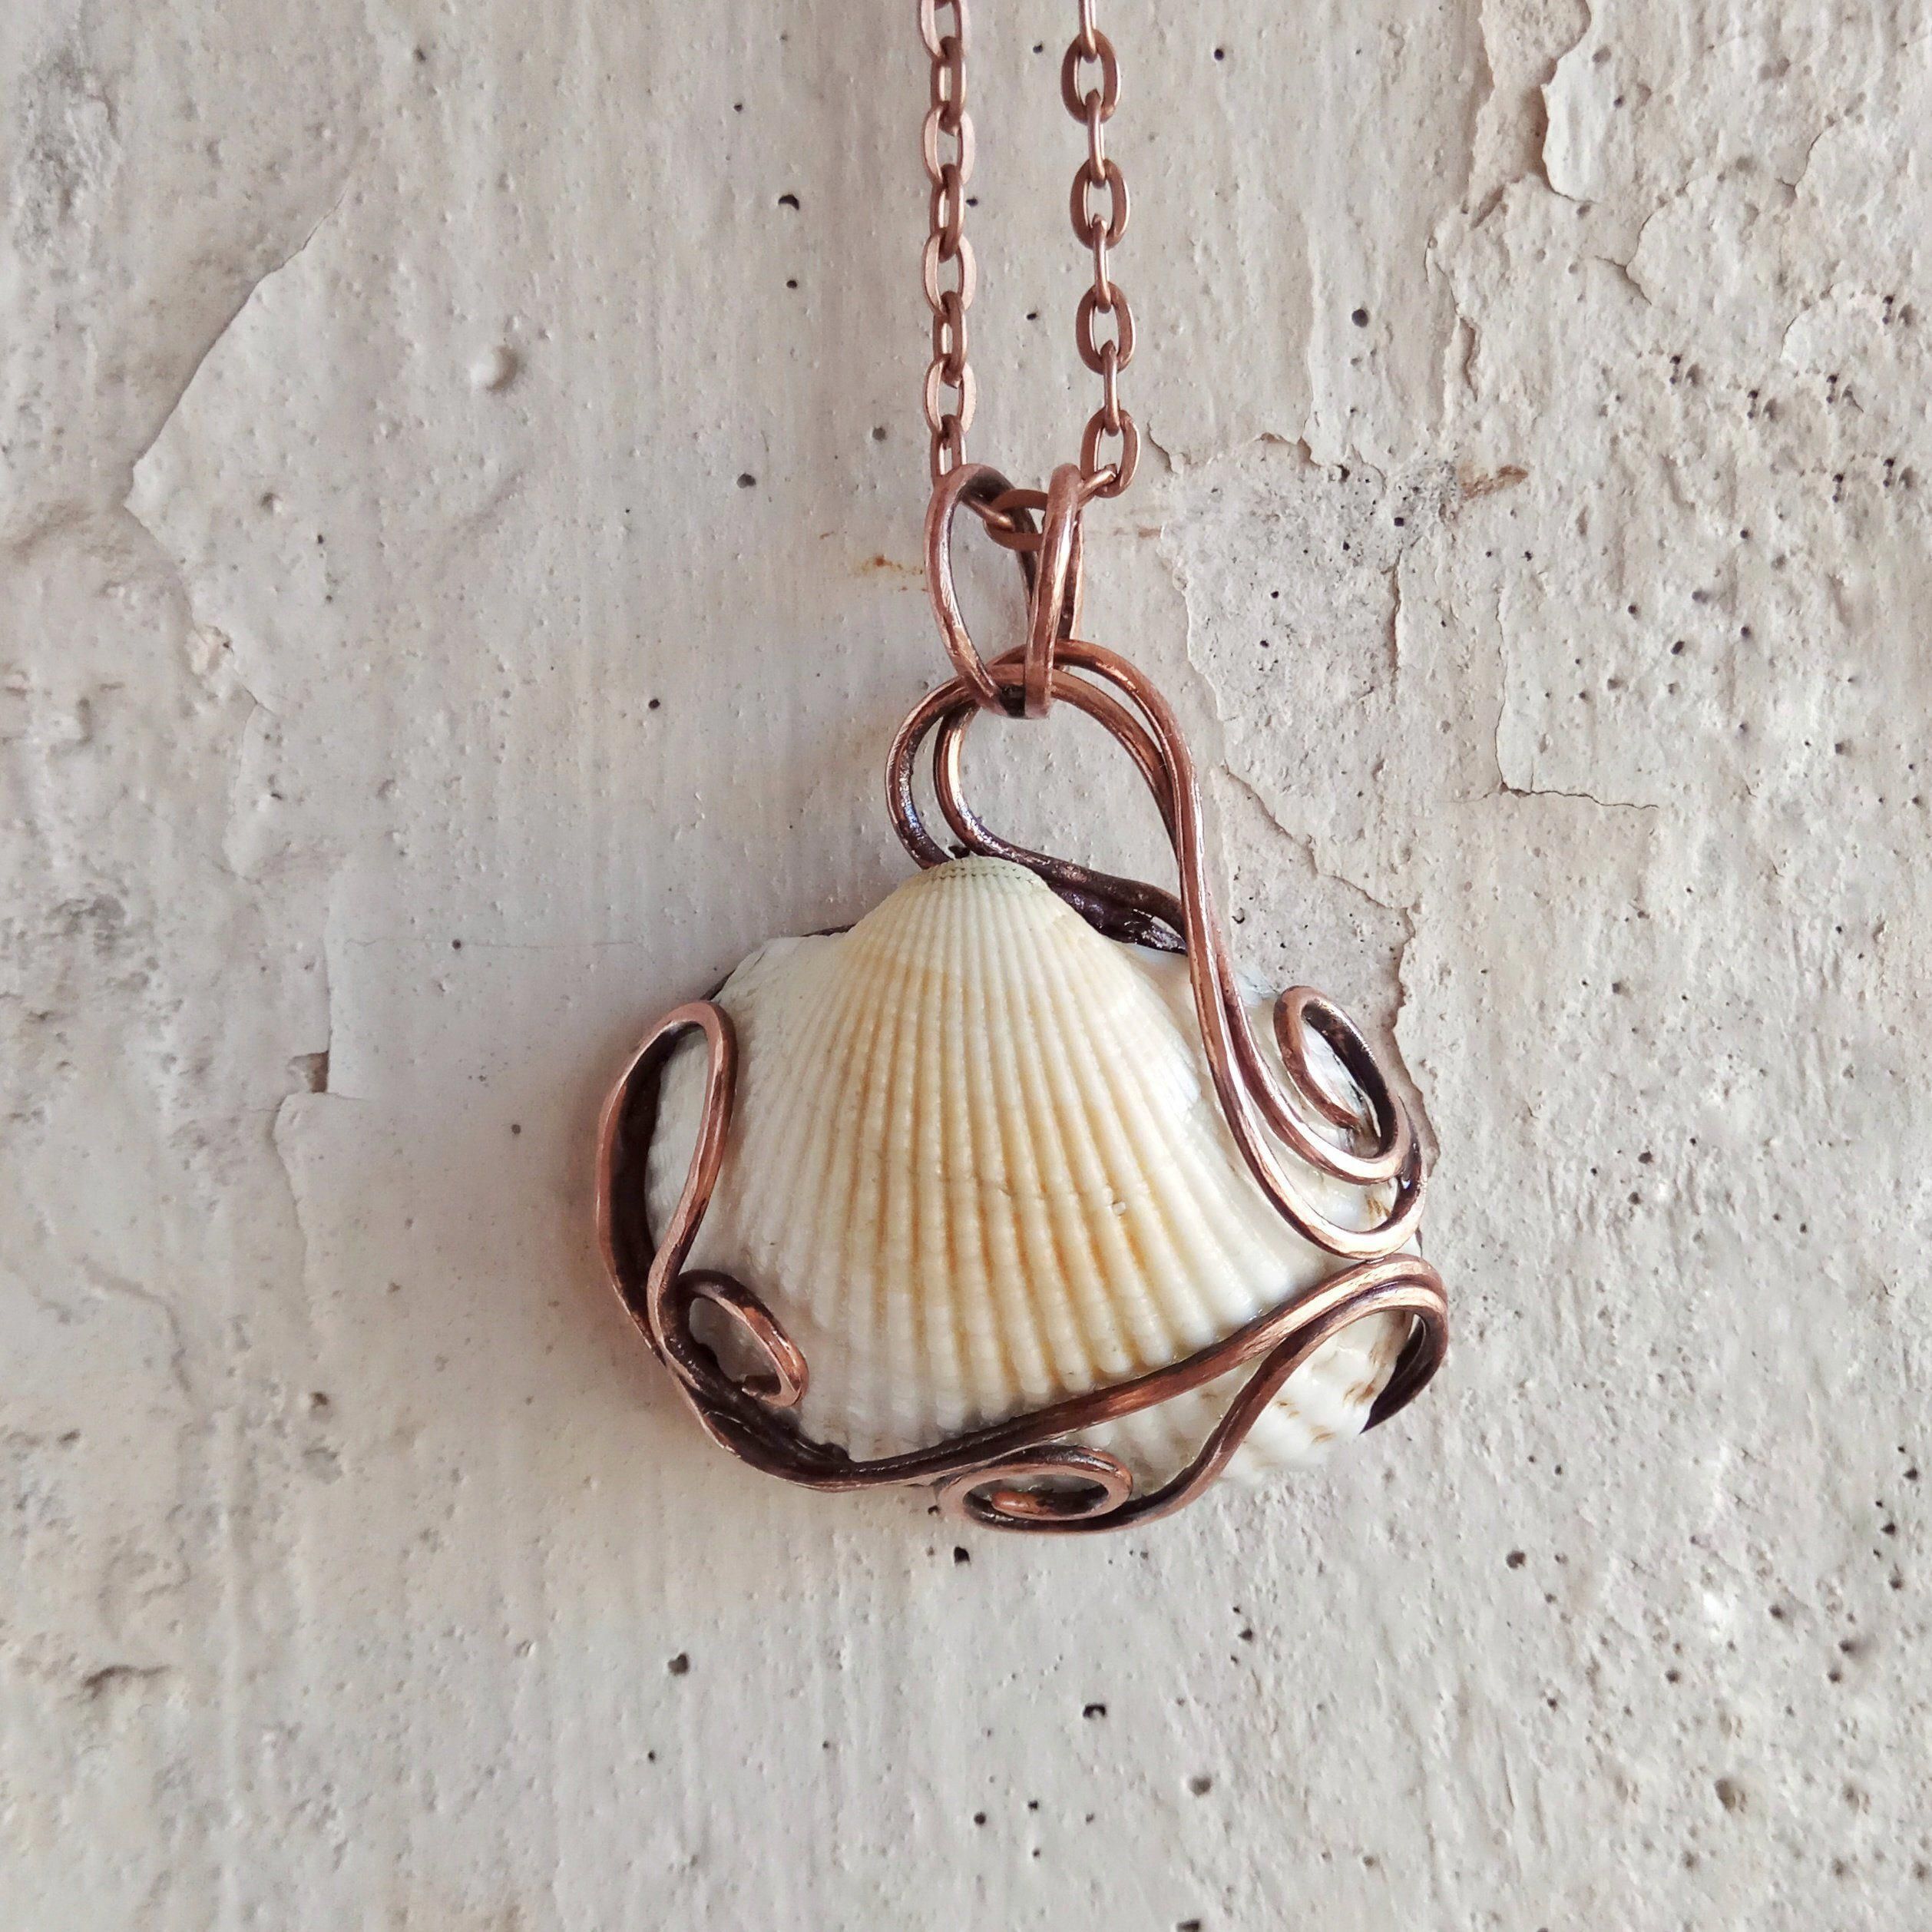 Copper sea shell necklace Wire wrap mermaid pendant Copper wire wrapped jewelry Gift for sister Gift for girlfriend Seashell boho necklace - Copper sea shell necklace Wire wrap mermaid pendant Copper wire wrapped jewelry Gift for sister Gift for girlfriend Seashell boho necklace -   19 diy Jewelry inspiration ideas